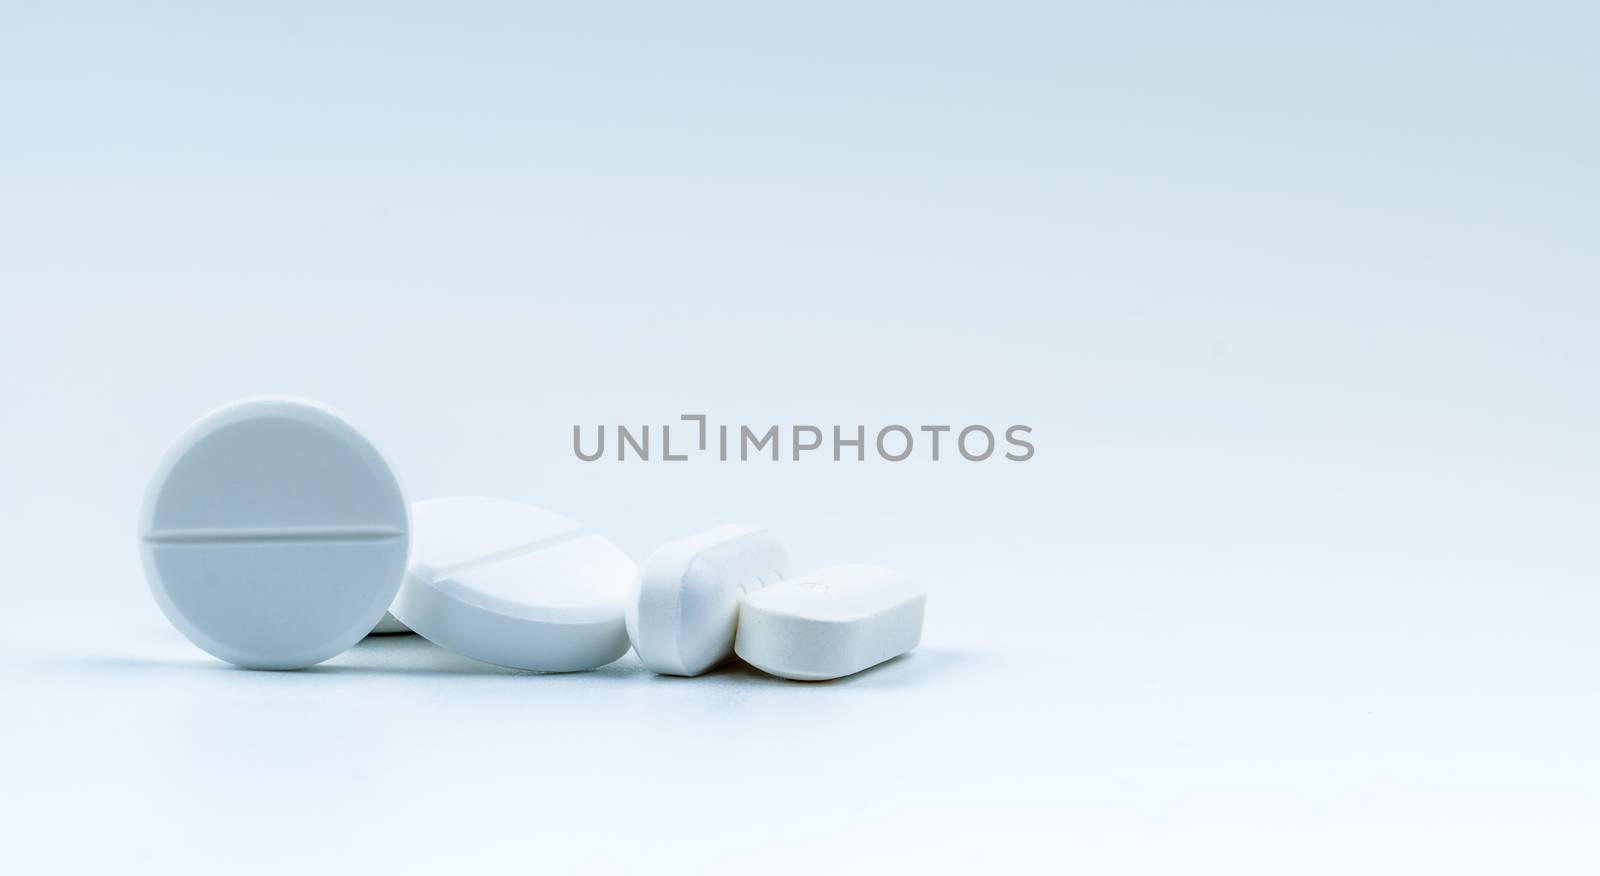 Pile of white round and oblong shape tablet pills isolated on white background. Pharmaceutical industry. Pharmacy or drugstore sign and symbol. Global healthcare concept. Health and pharmacology.